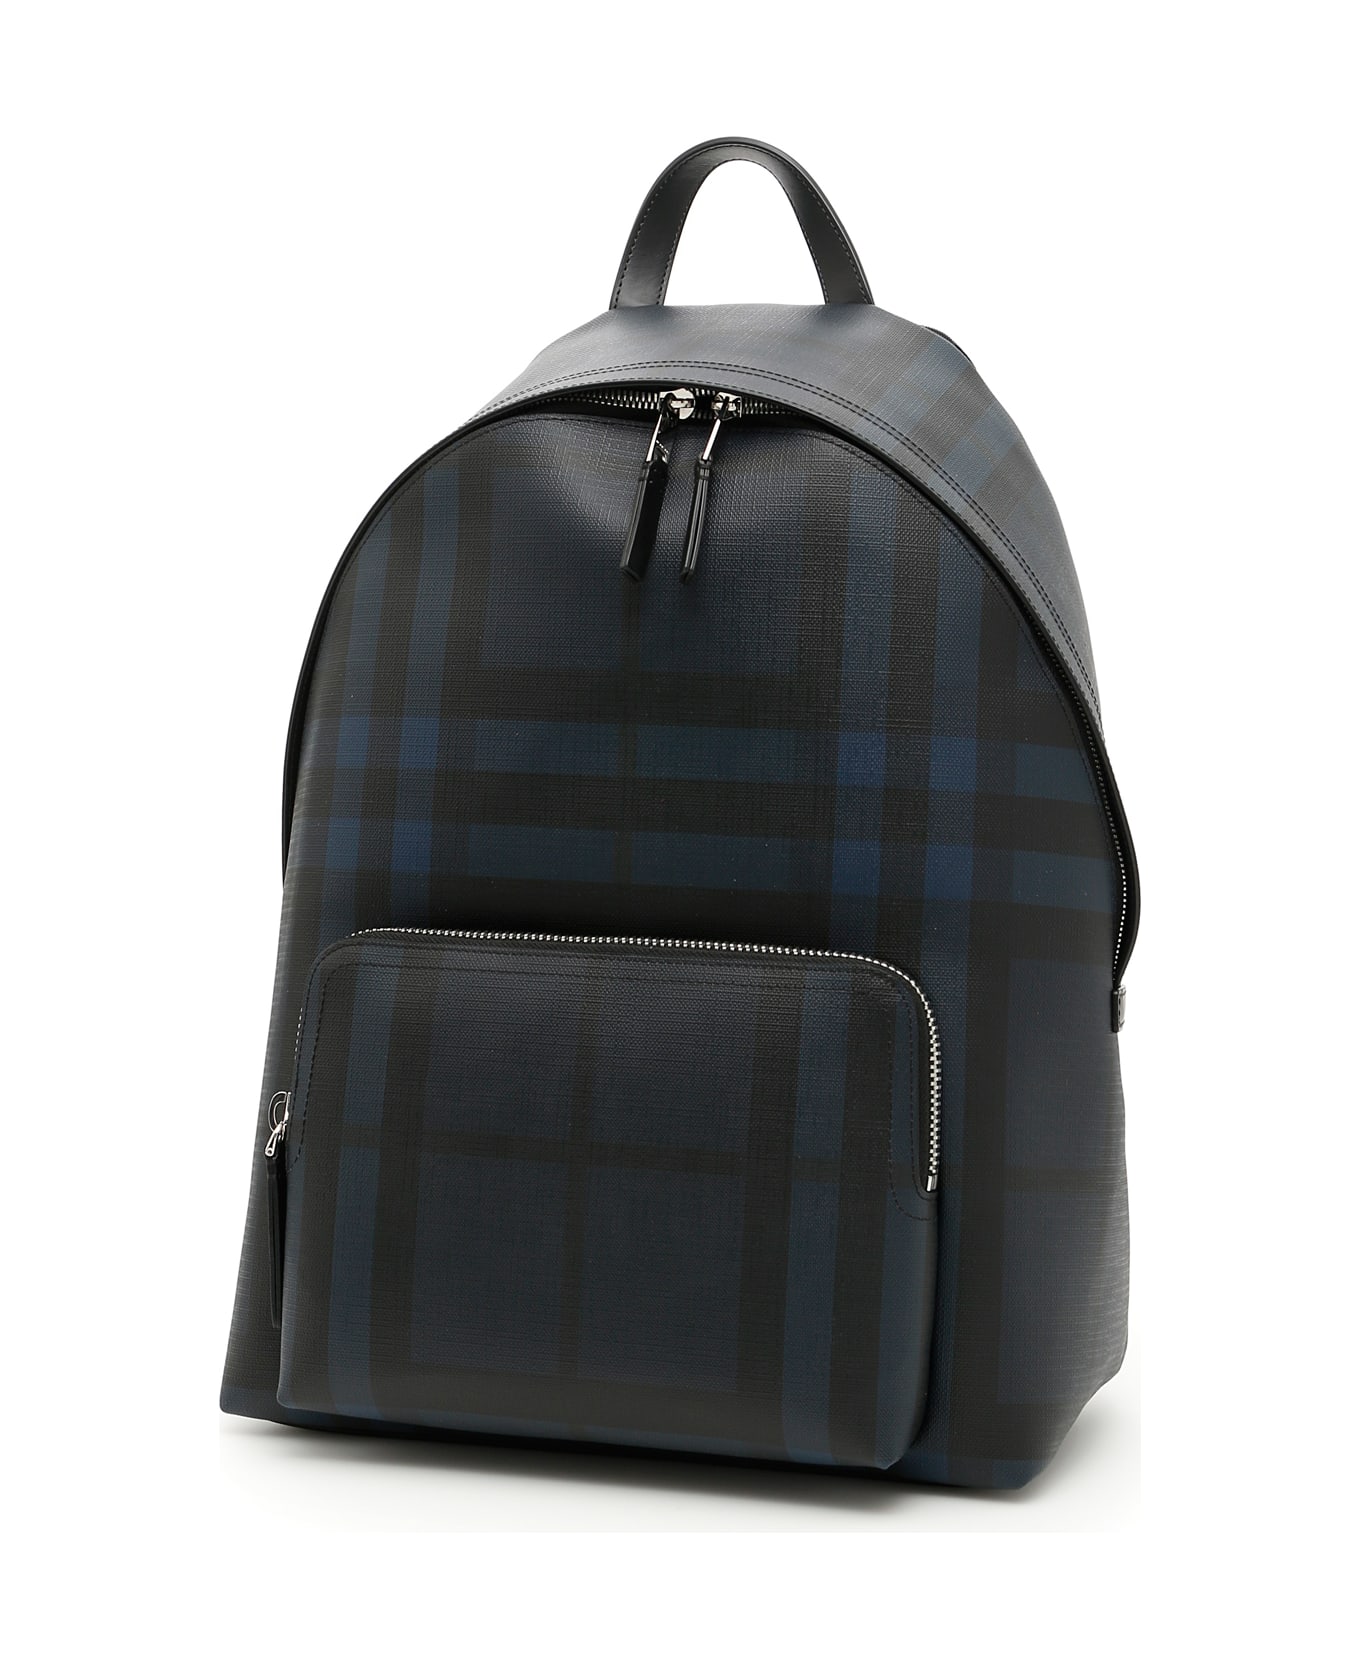 Burberry London Check Abbeydale Backpack | italist